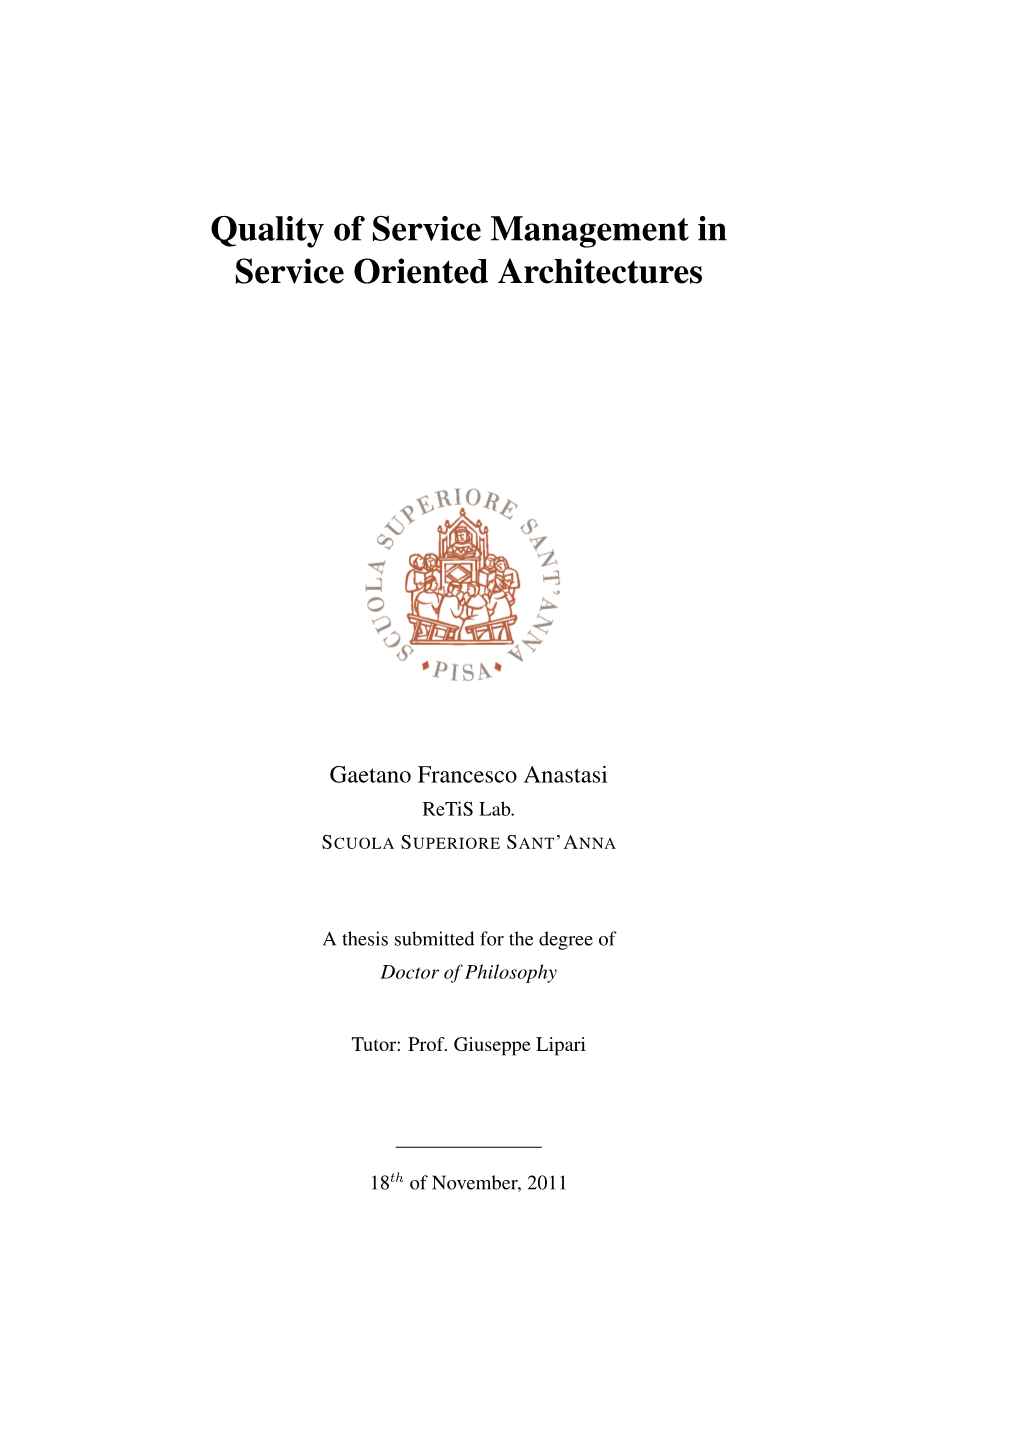 Quality of Service Management in Service Oriented Architectures